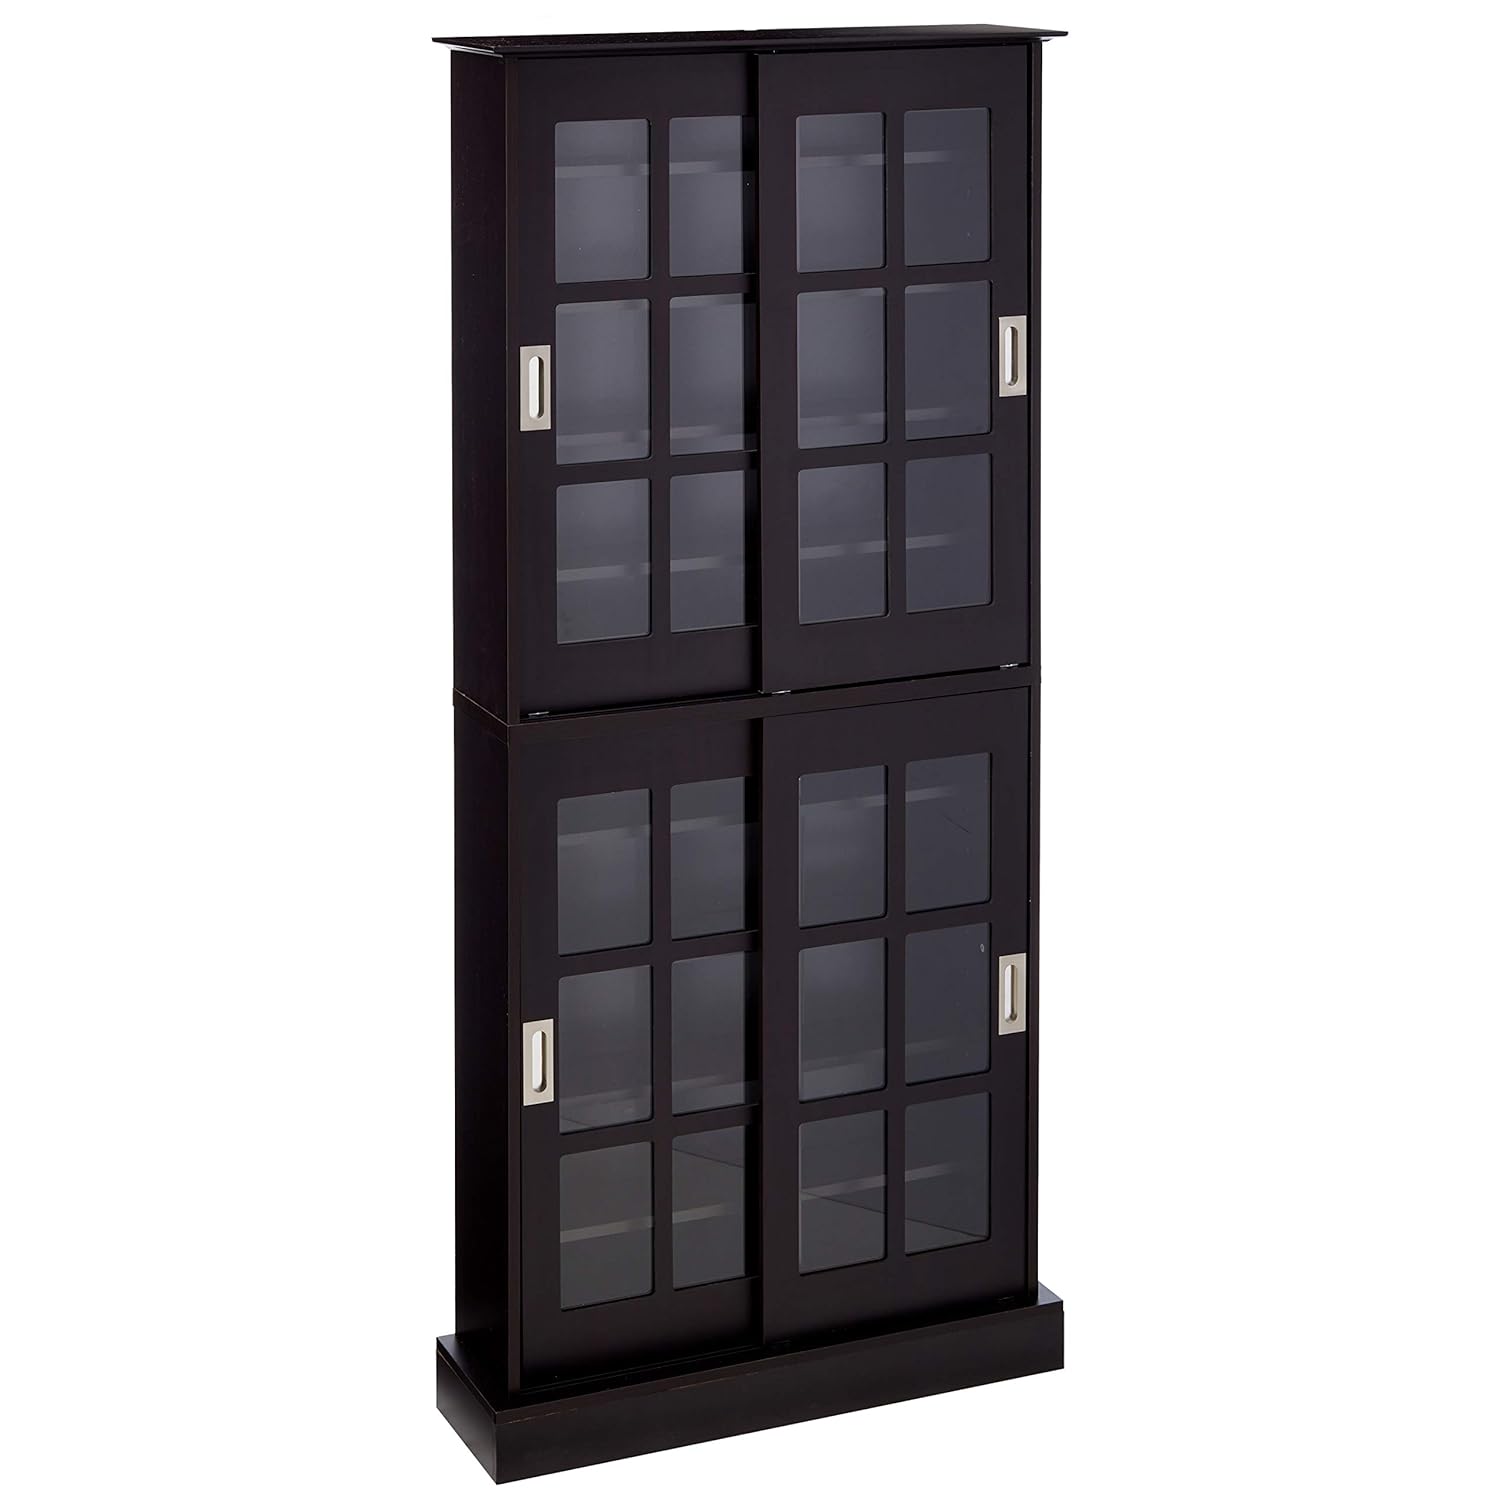 GCP Products Windowpane Multimedia-Storage Cabinet - Tempered Glass Pane Style, Sliding Doors, Stores 720 Cds, 288 Dvds, 144 Cds…